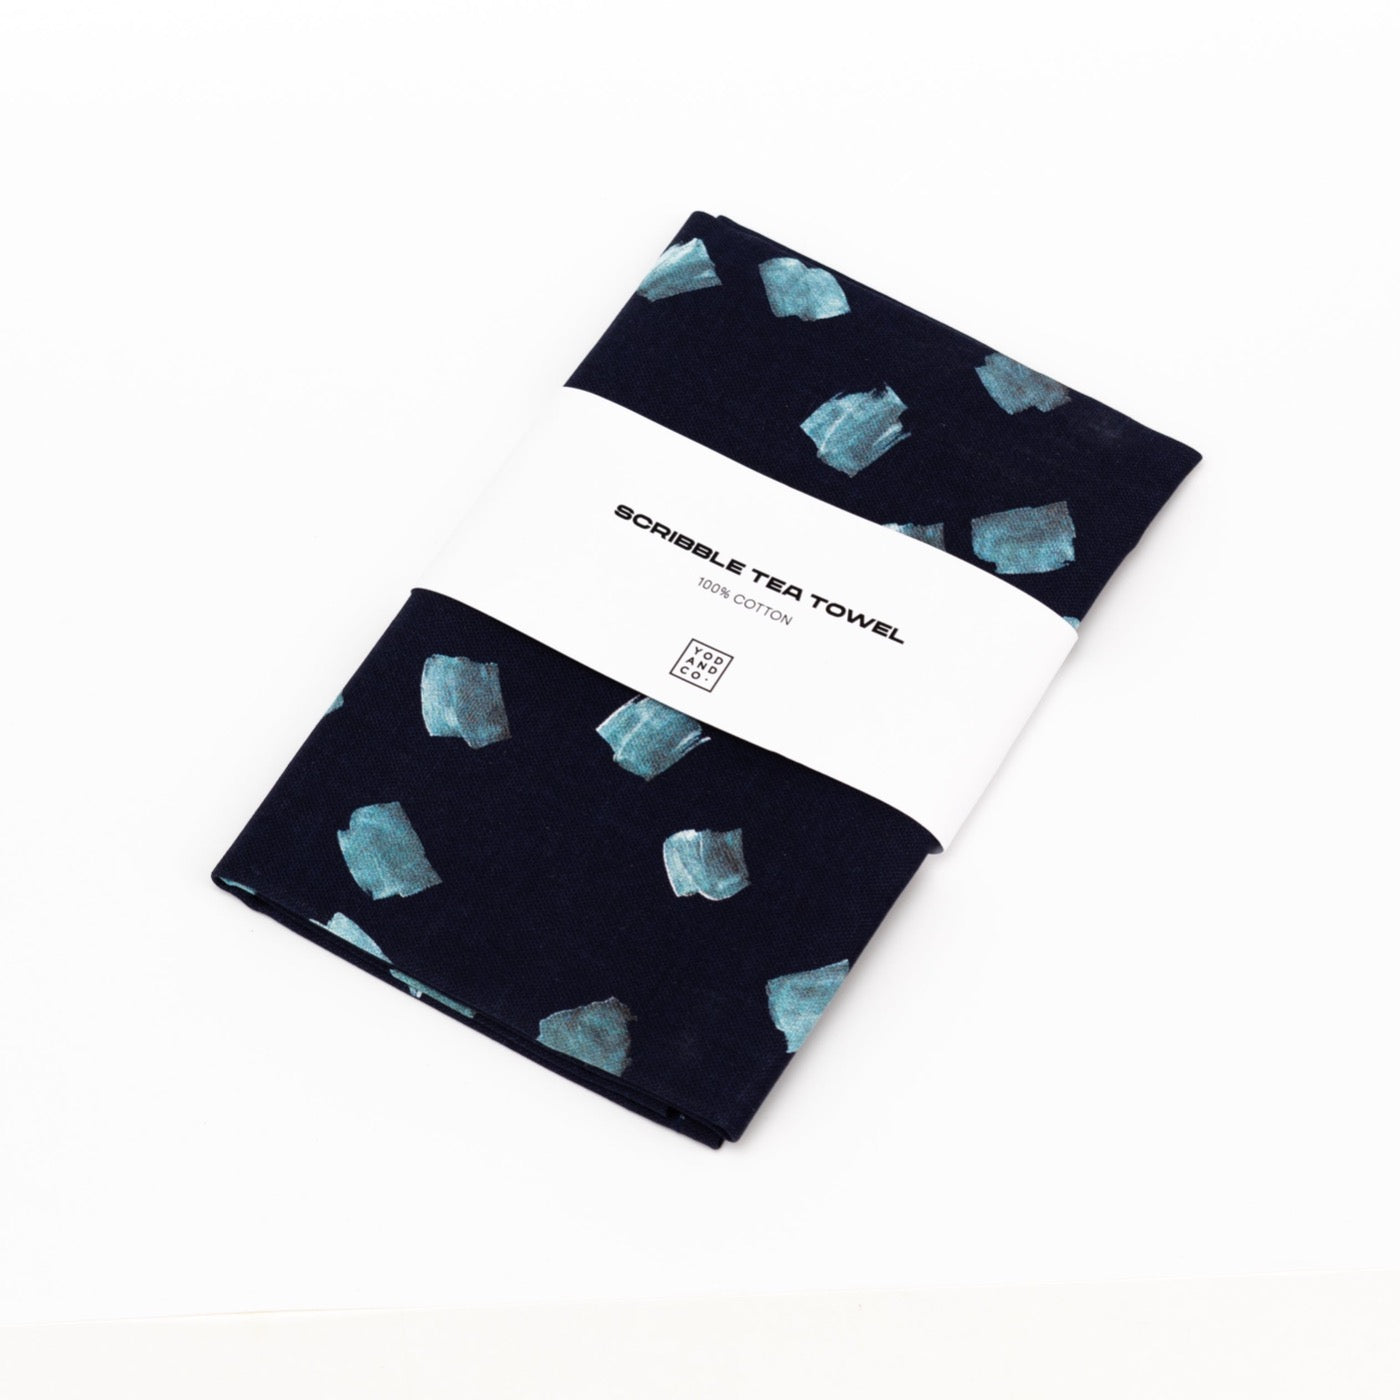 Blue scribble tea towel by yod and co